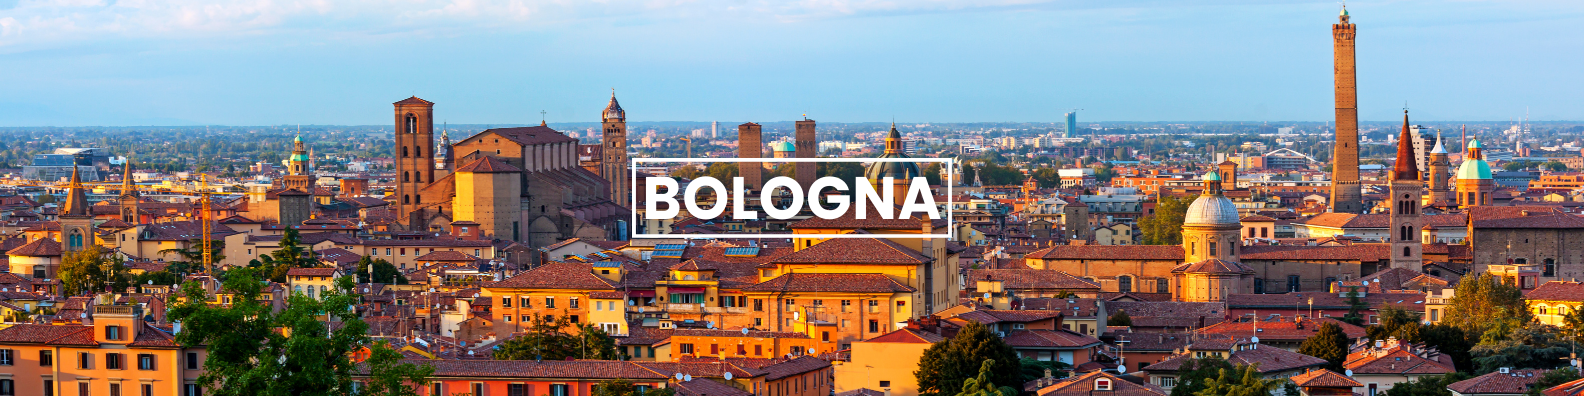 an aerial view of the city of bologna , italy .
Barter'sTravelnet